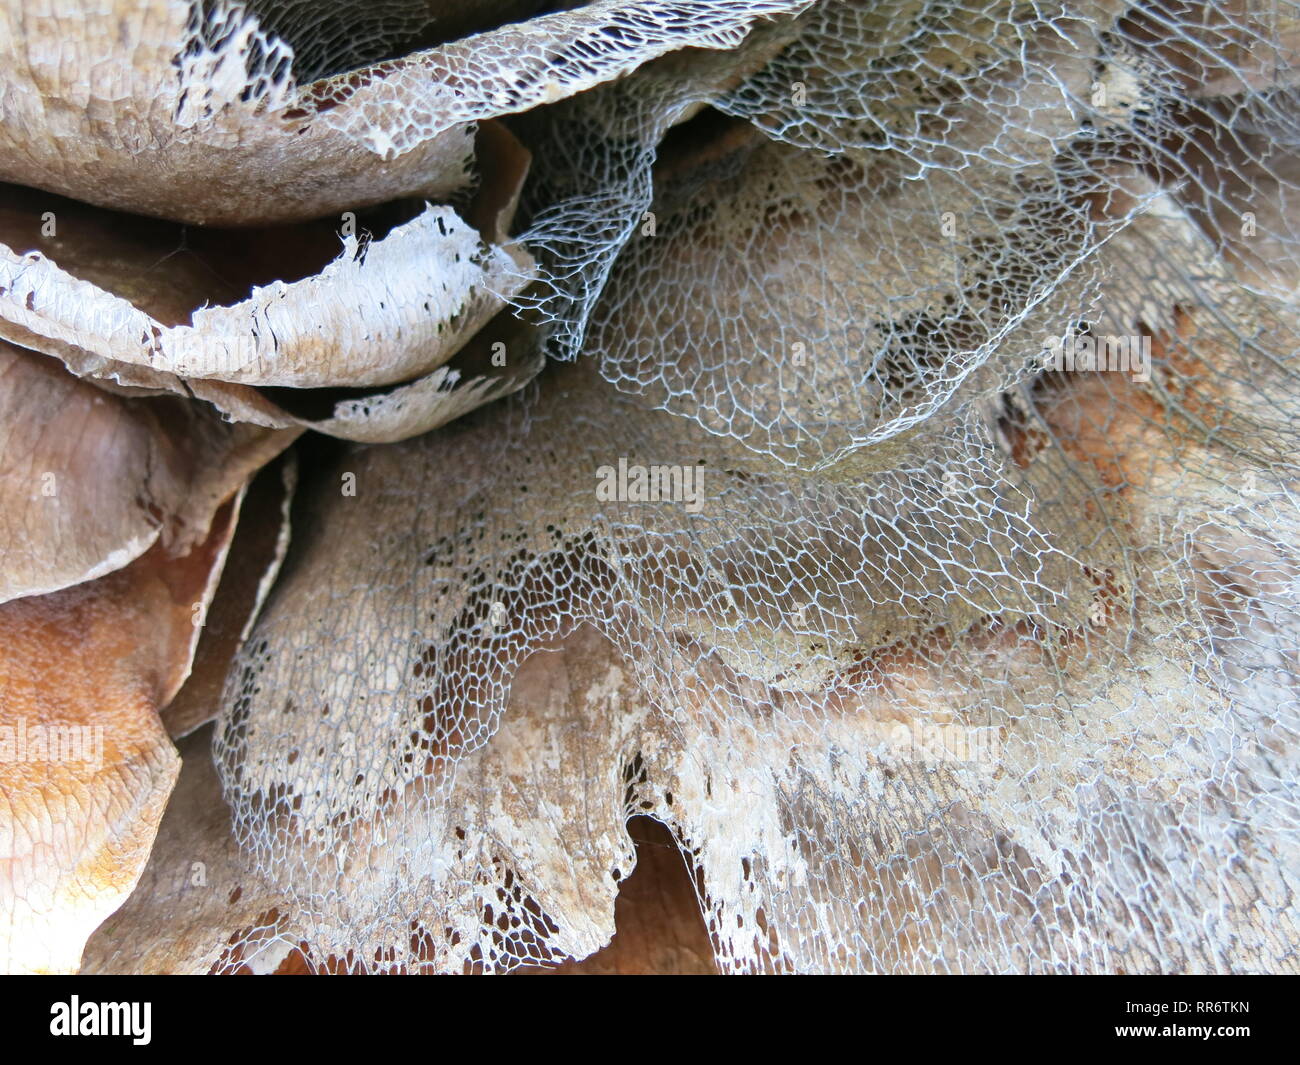 Abstract detail of the desiccated lacy foliage and brittle decay of the leaves of a greenhouse cactus plant; hues of beige and bleached grey. Stock Photo